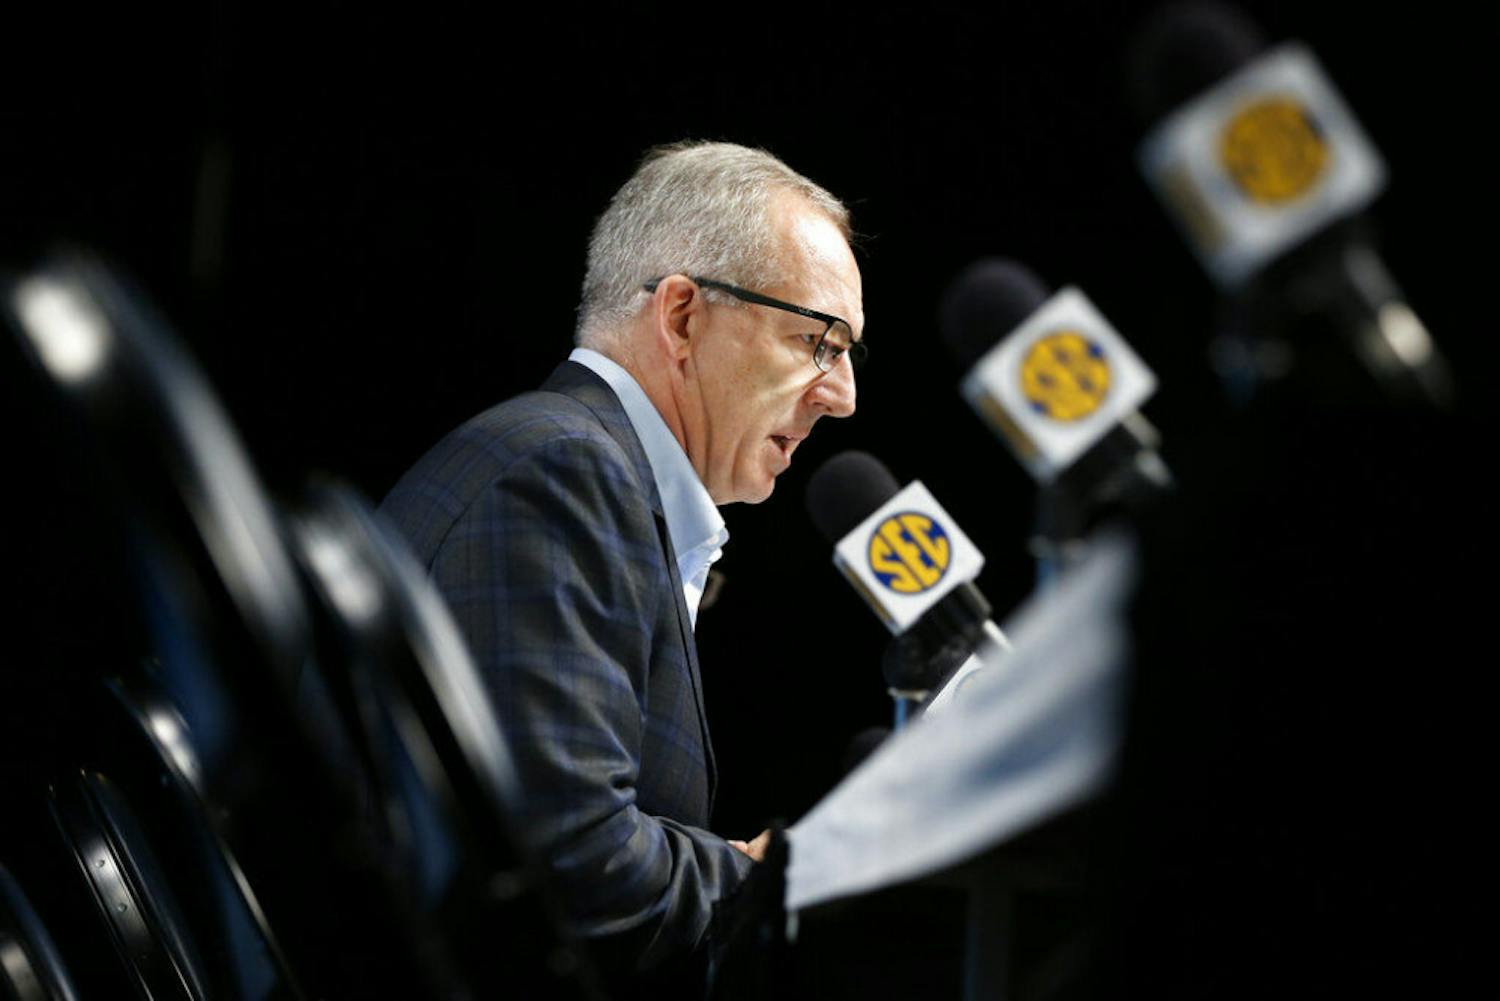 Greg Sankey, commissioner of the Southeastern Conference, talks about the decision to cancel the remaining games in the SEC NCAA college basketball tournament Thursday, March 12, 2020, in Nashville, Tenn. The conference tournament was cancelled Thursday due to coronavirus concerns. (AP Photo/Mark Humphrey)